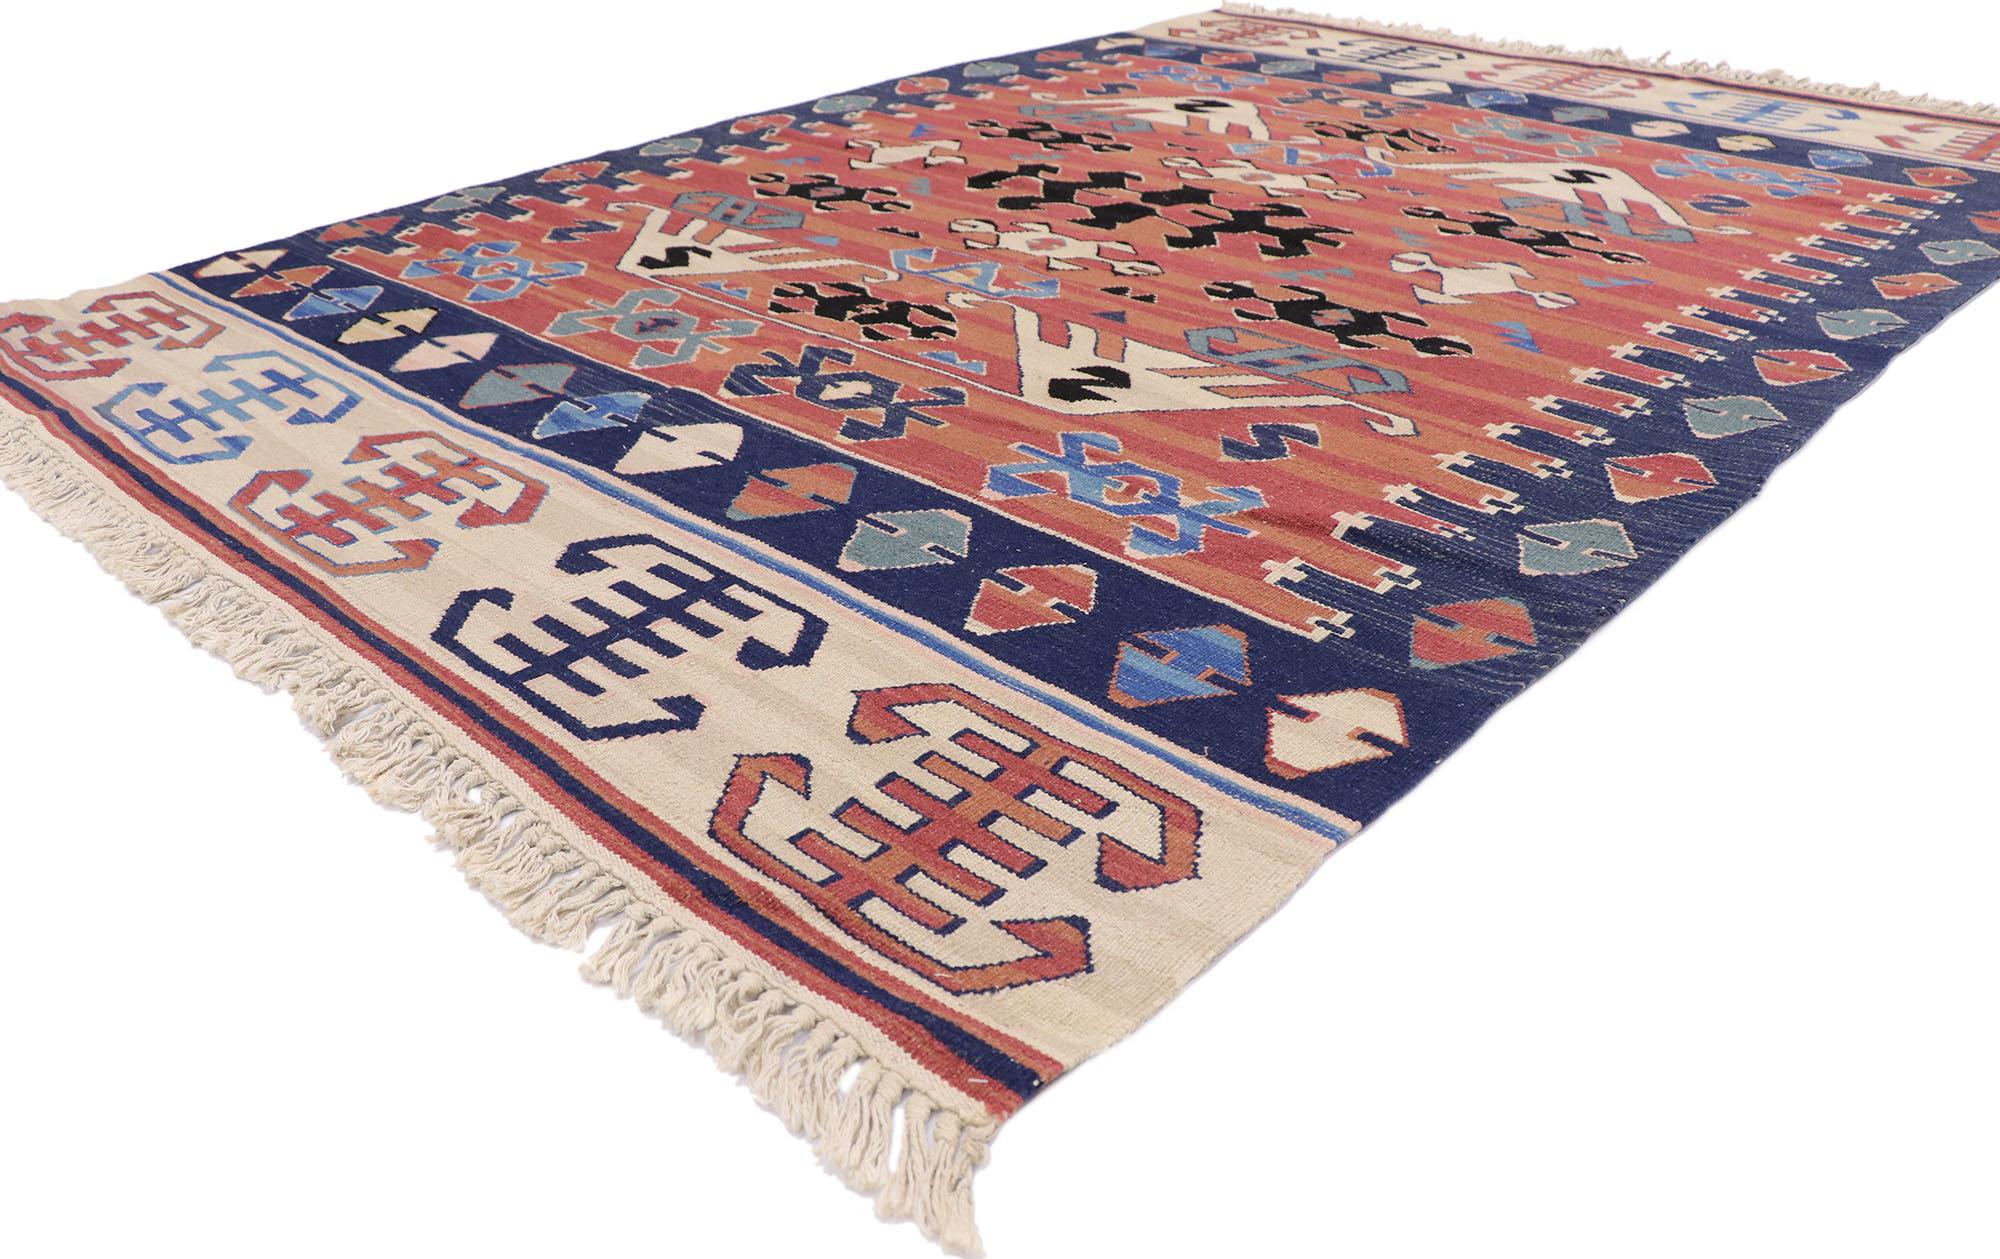 77947 Vintage Persian Bijar Kilim Rug, 05'06 x 07'10.
Embark on a transcendent journey where tribal enchantment converges with the free-spirited allure of boho gypset style, encapsulated within the intricate threads of our handwoven wool vintage